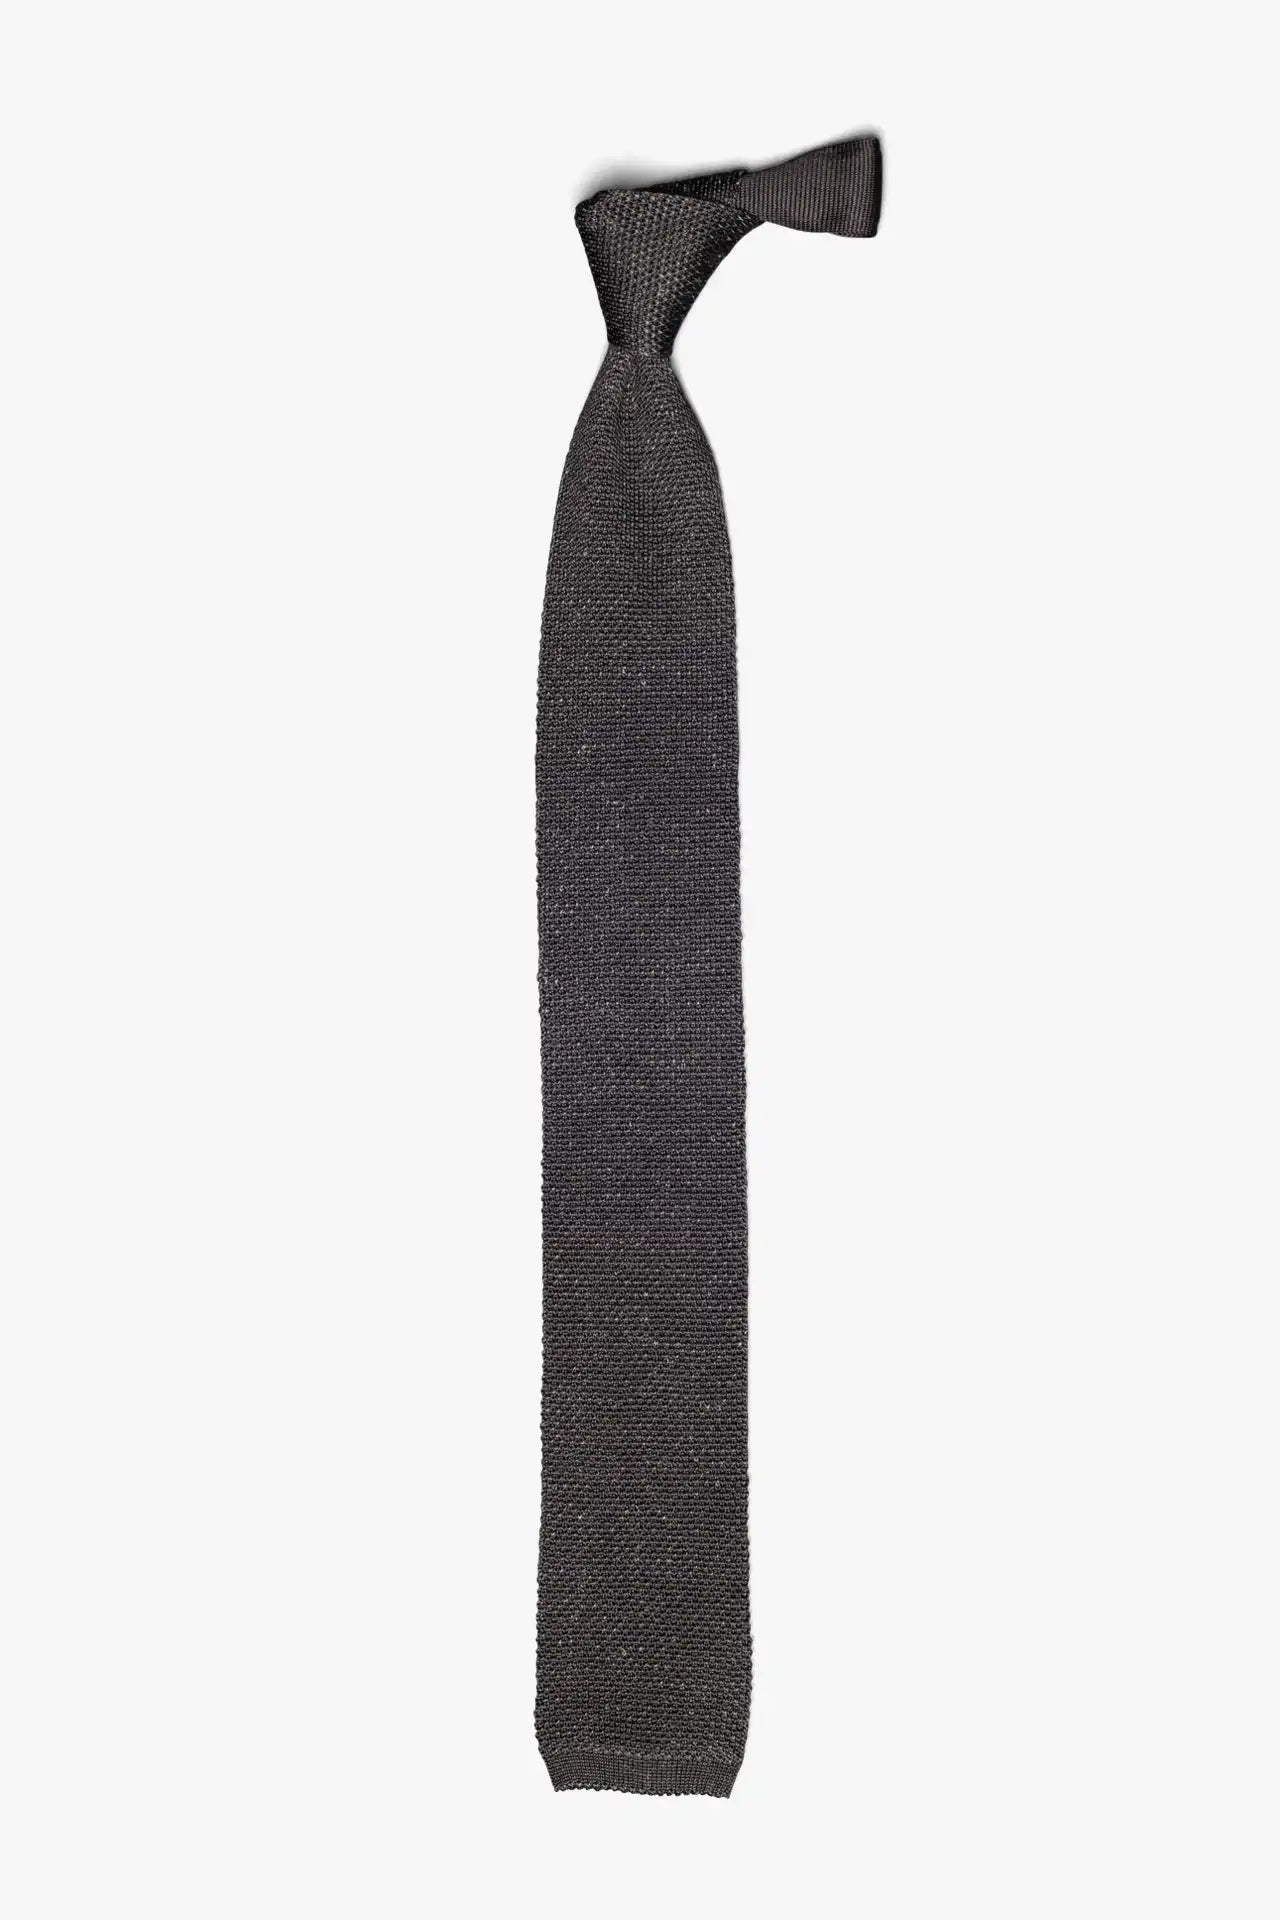 Silk Linen Tie - Gray Melange - once a day